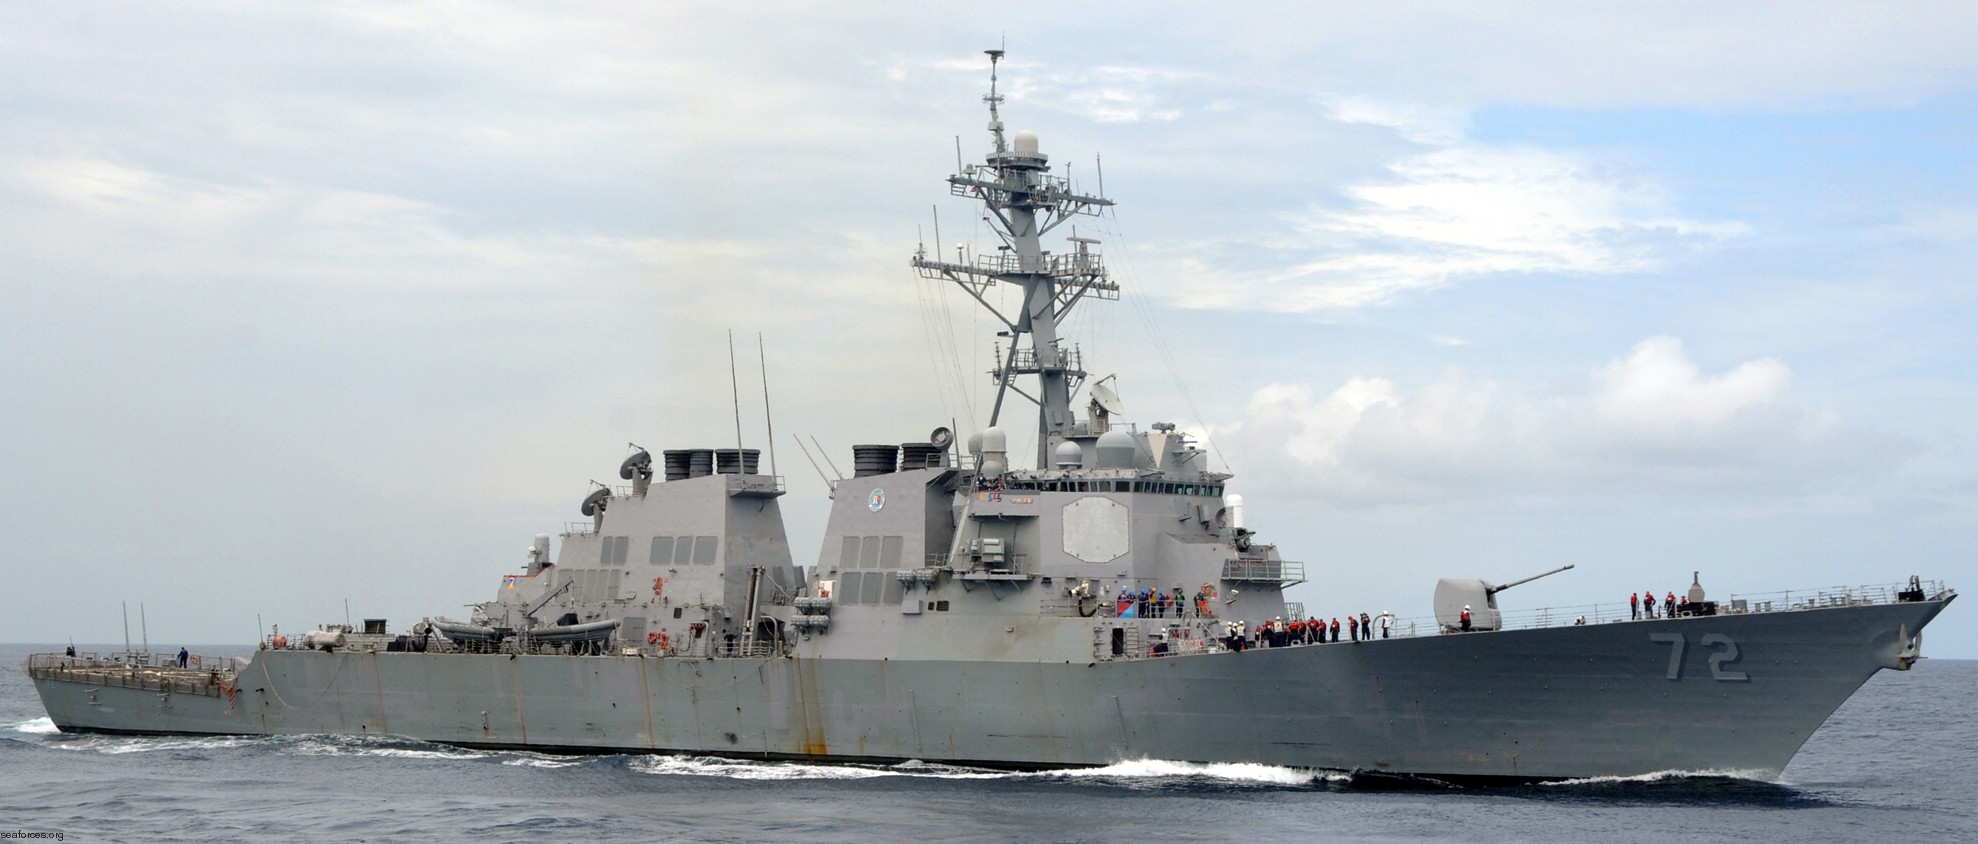 ddg-72 uss mahan guided missile destroyer arleigh burke class aegis bmd 29